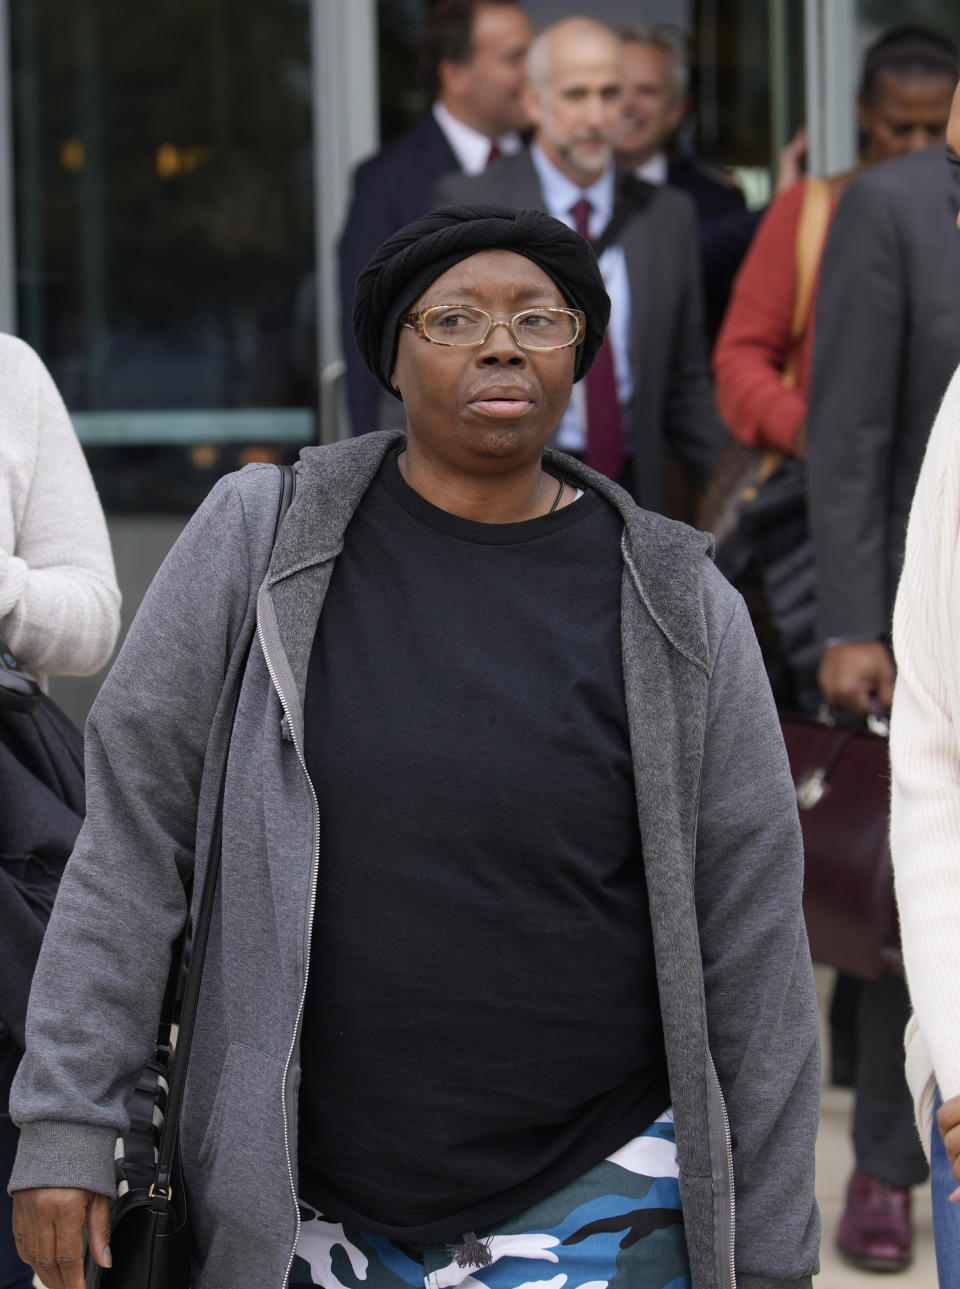 Sheneen McClain, mother of Elijah McClain, leaves the Adams County, Colo., Courthouse after hearing the verdict in the trial involving the 2019 death of her son on Thursday, Oct. 12, 2023, in Brighton, Colo. (AP Photo/David Zalubowski)